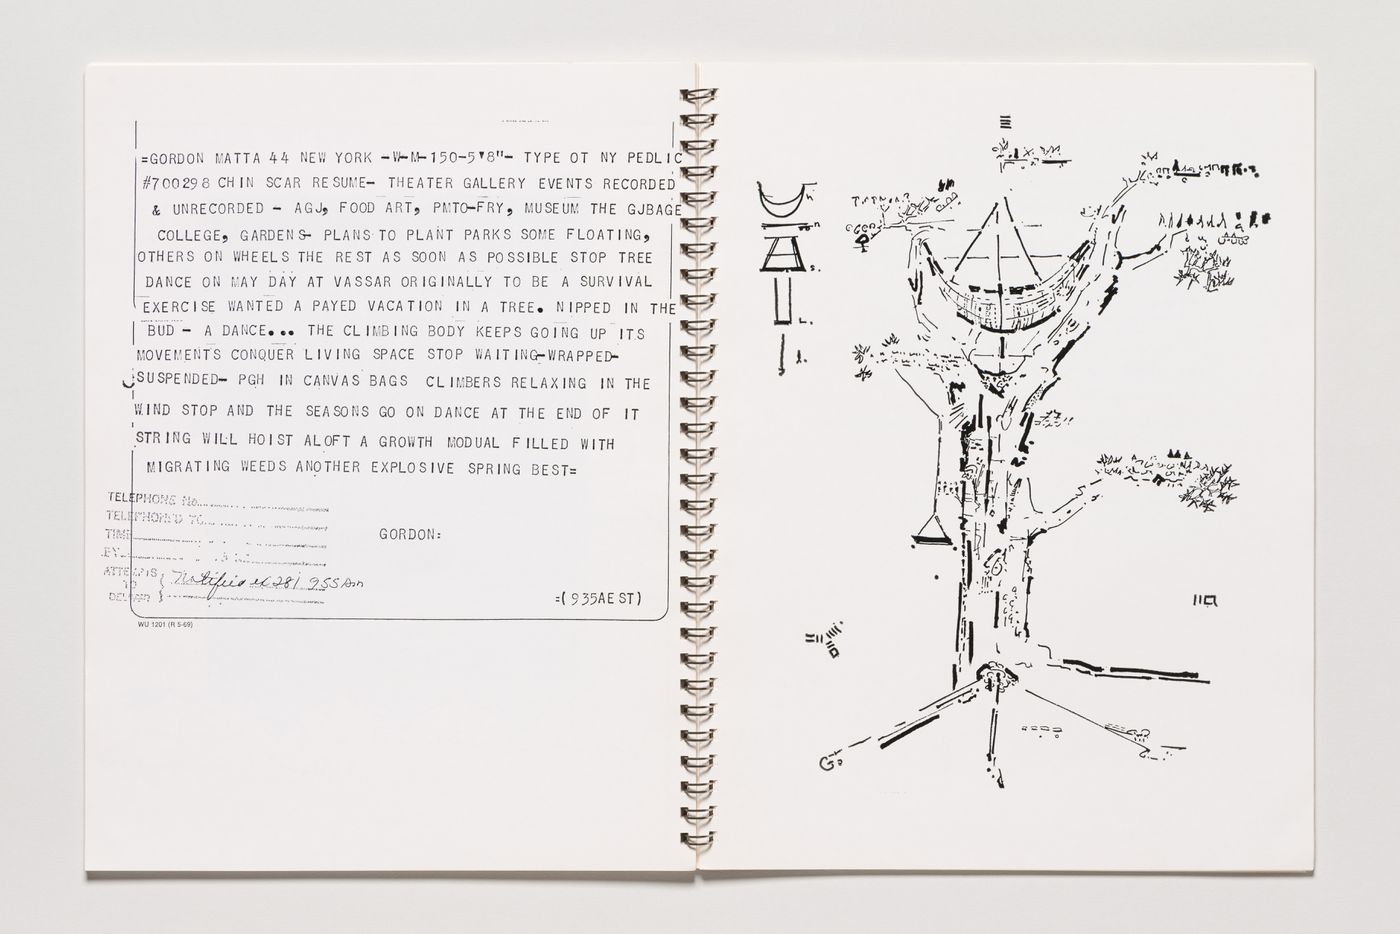 Statement by Gordon Matta-Clark published in the catalogue for the exhibition "Twenty Six by Twenty Six", held at the Vassar College Art Gallery, between 1 may - 6 June 1971